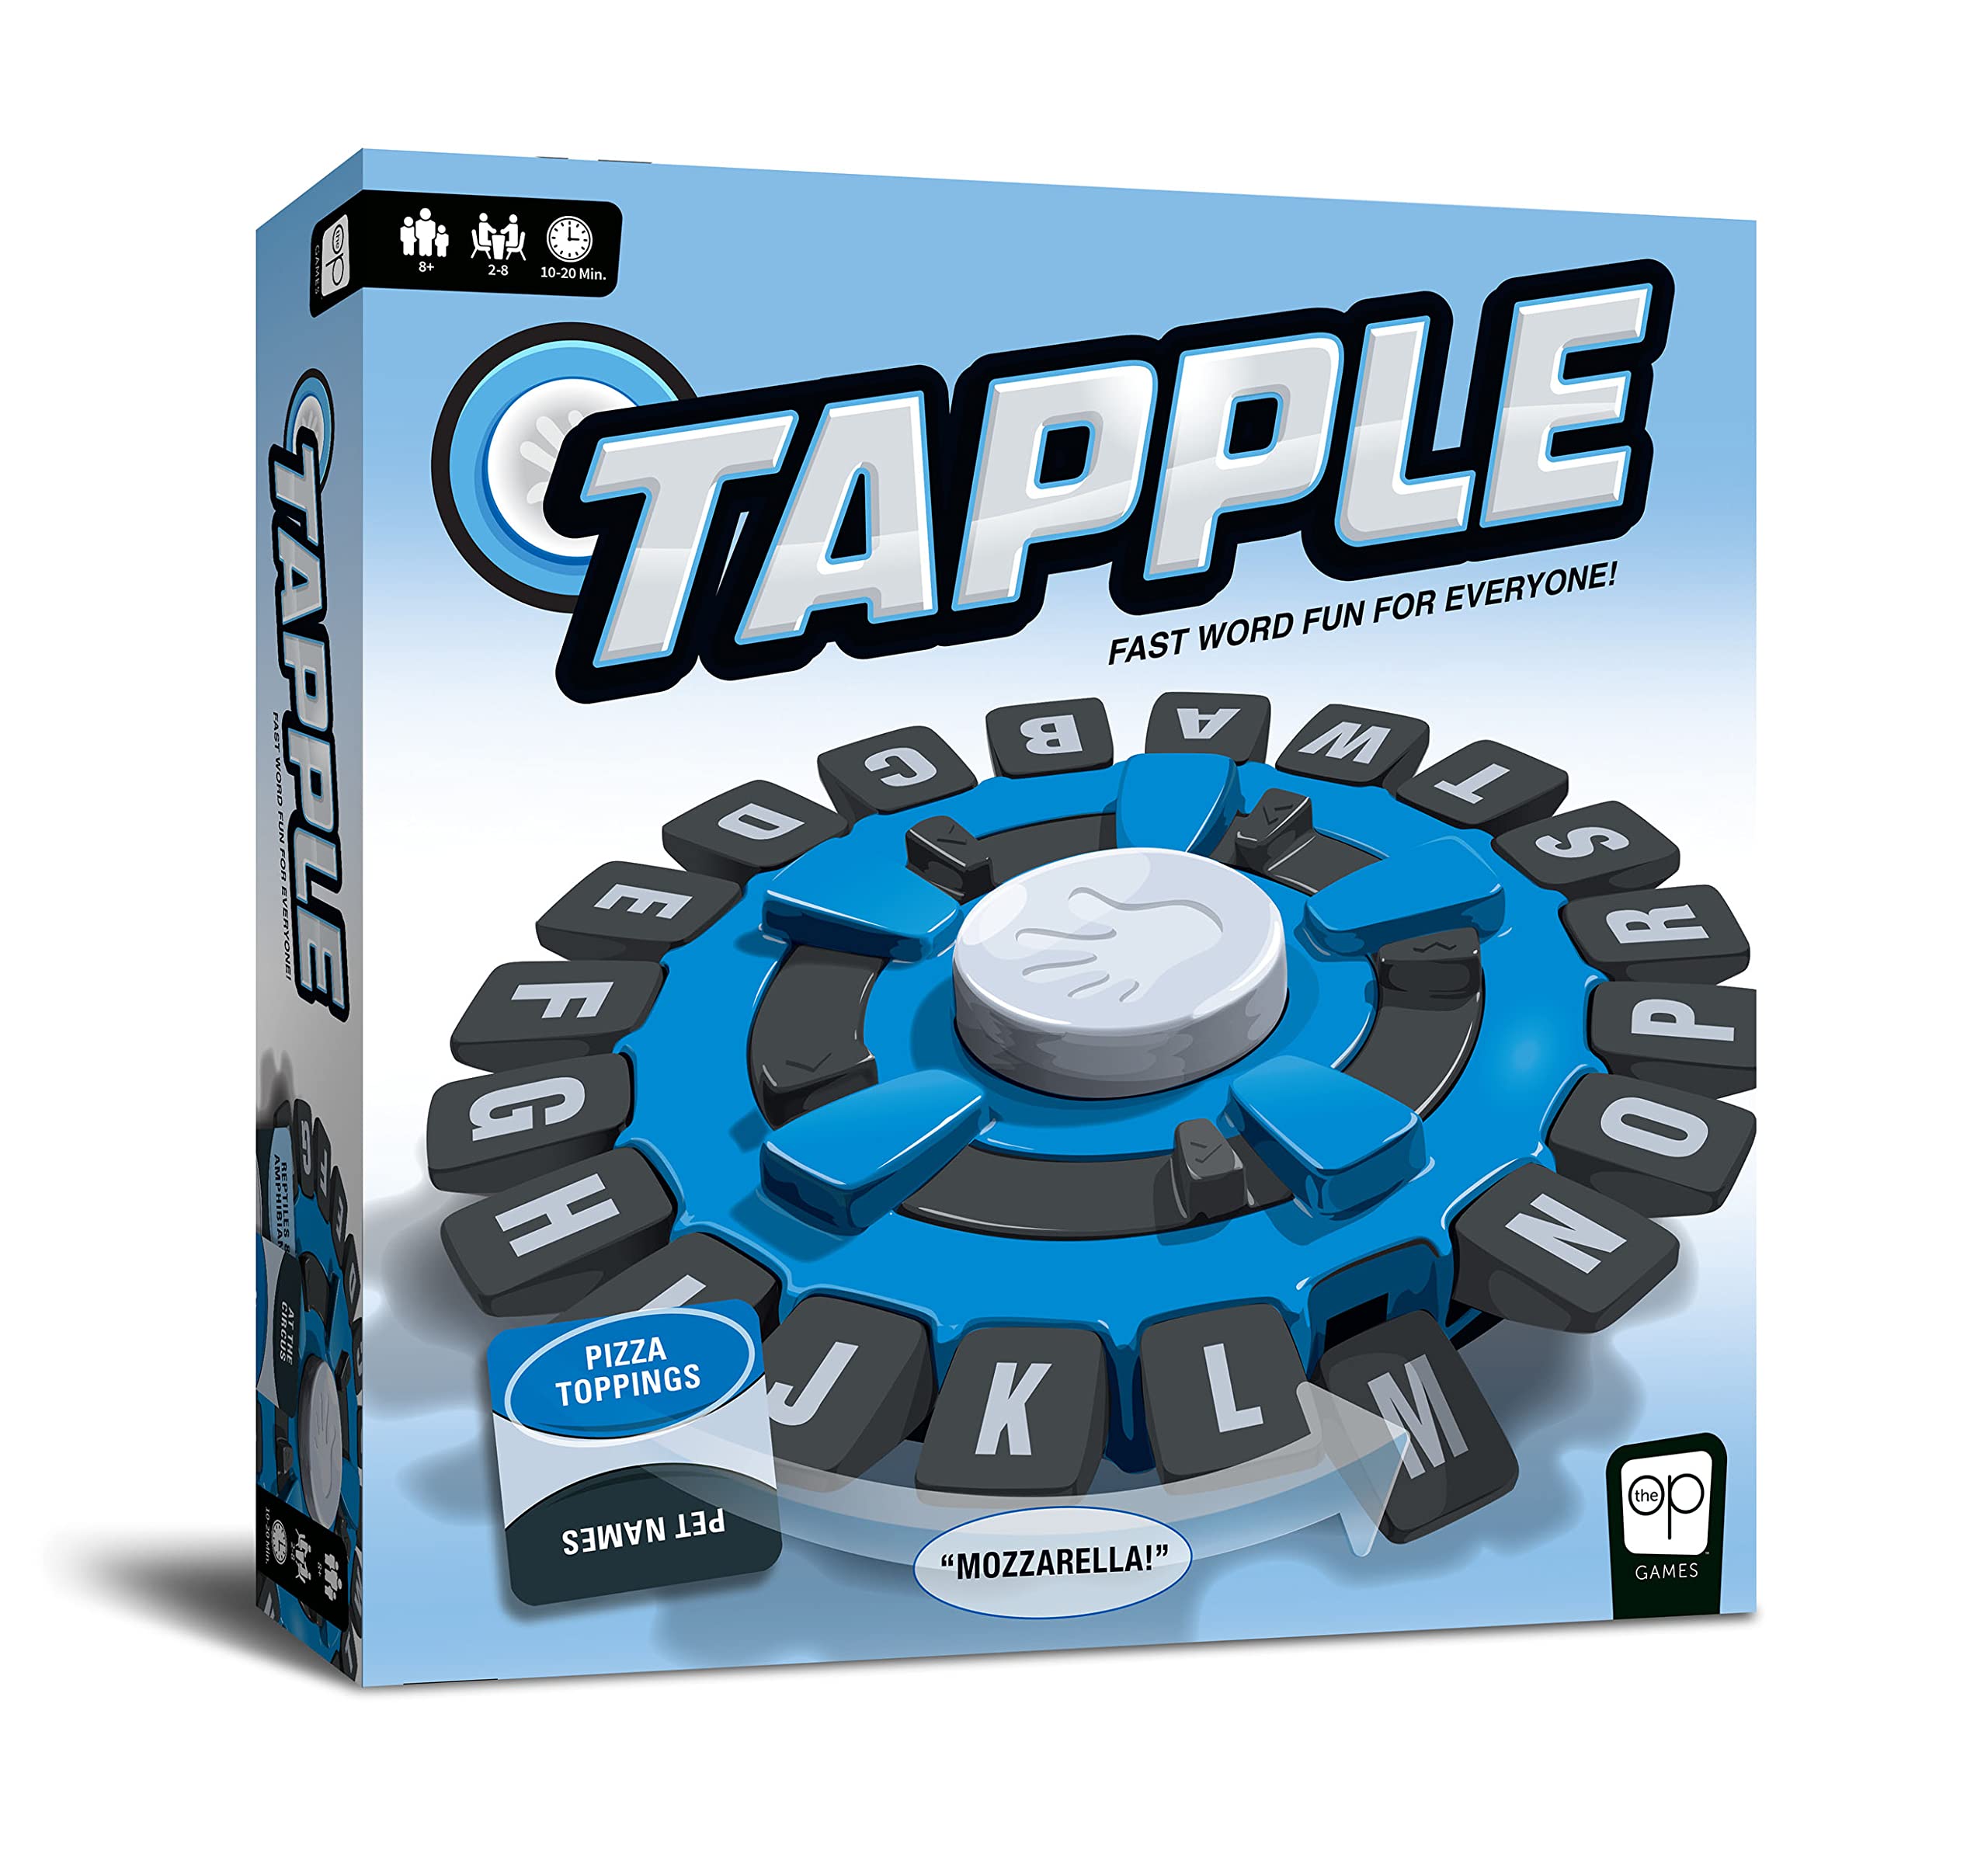 USAOPOLY TAPPLE® Word Game | Fast-Paced Family Board Game | Choose a Category & Race Against The Timer to be The Last Player | Learning Game Great for All Ages